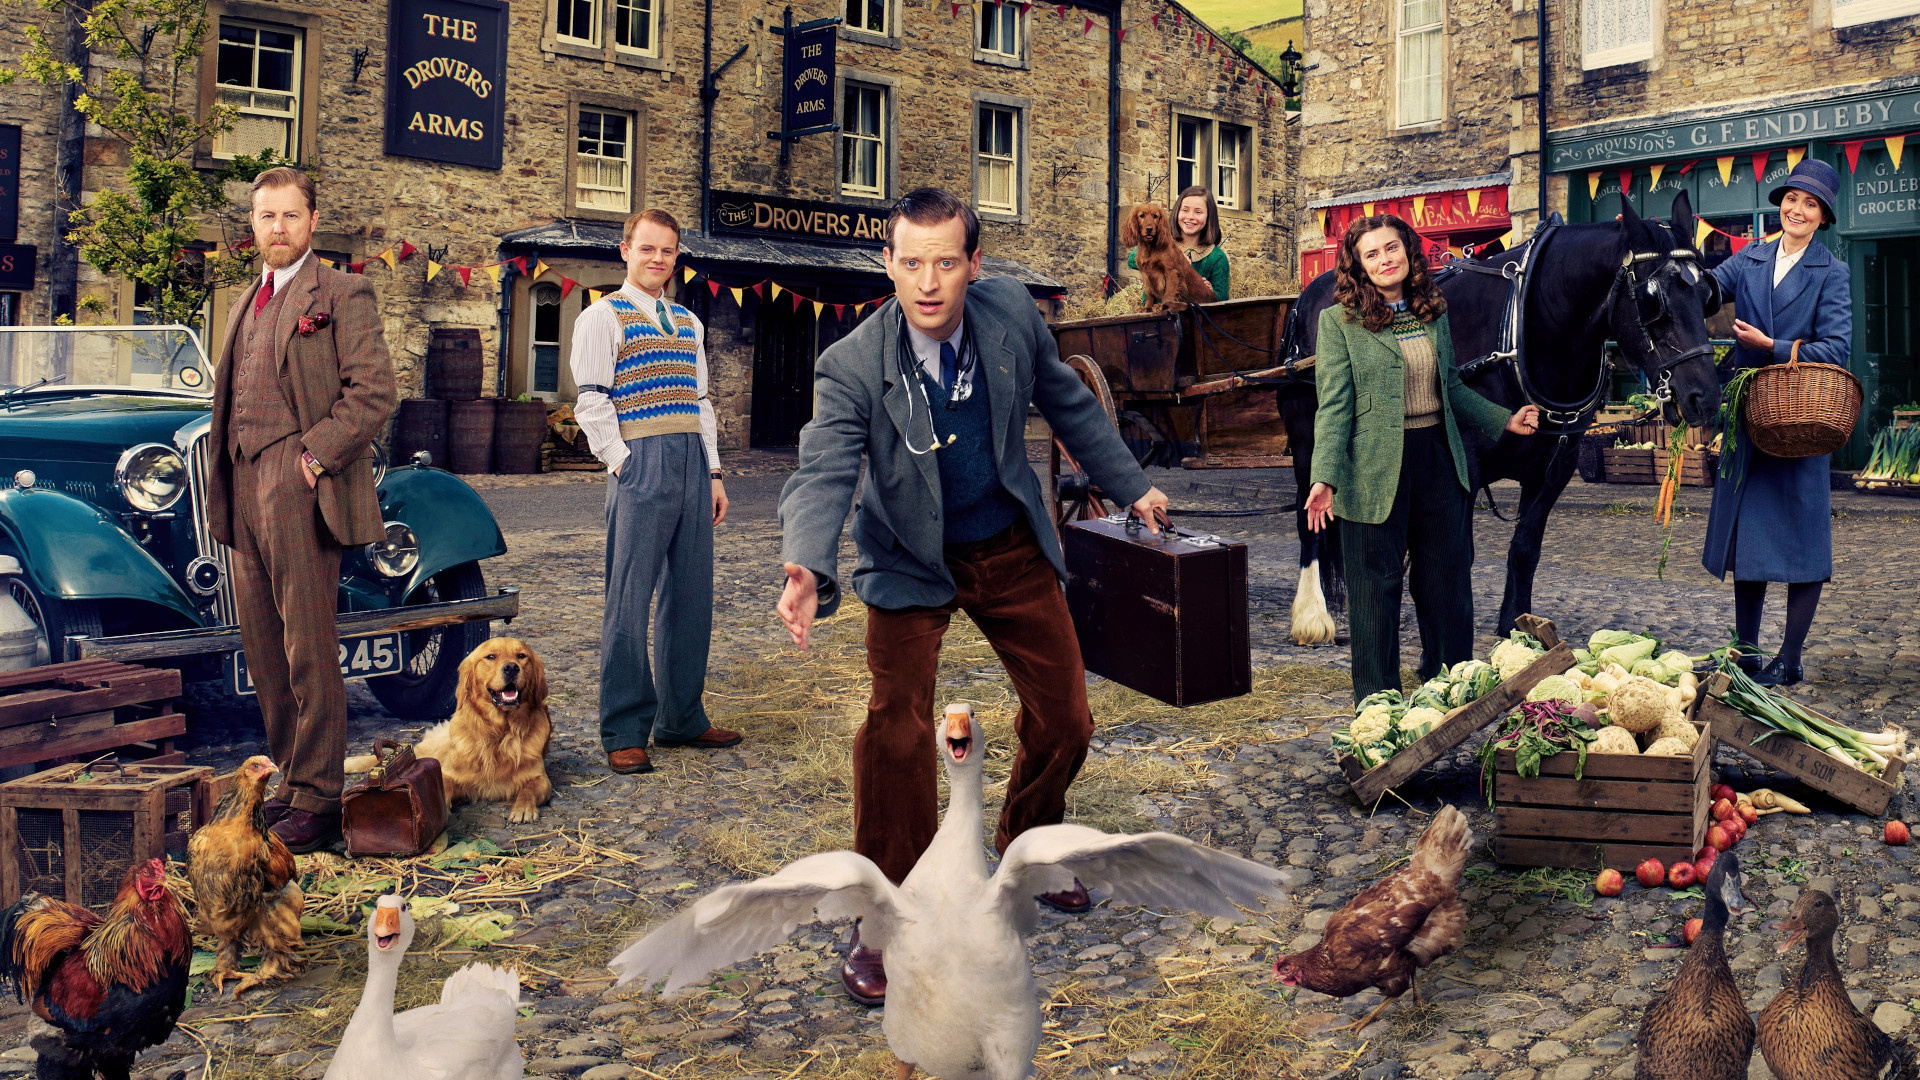 All Creatures Great and Small: TV series, A country veterinarian practice in 1930s to 1940s Yorkshire. 1920x1080 Full HD Background.